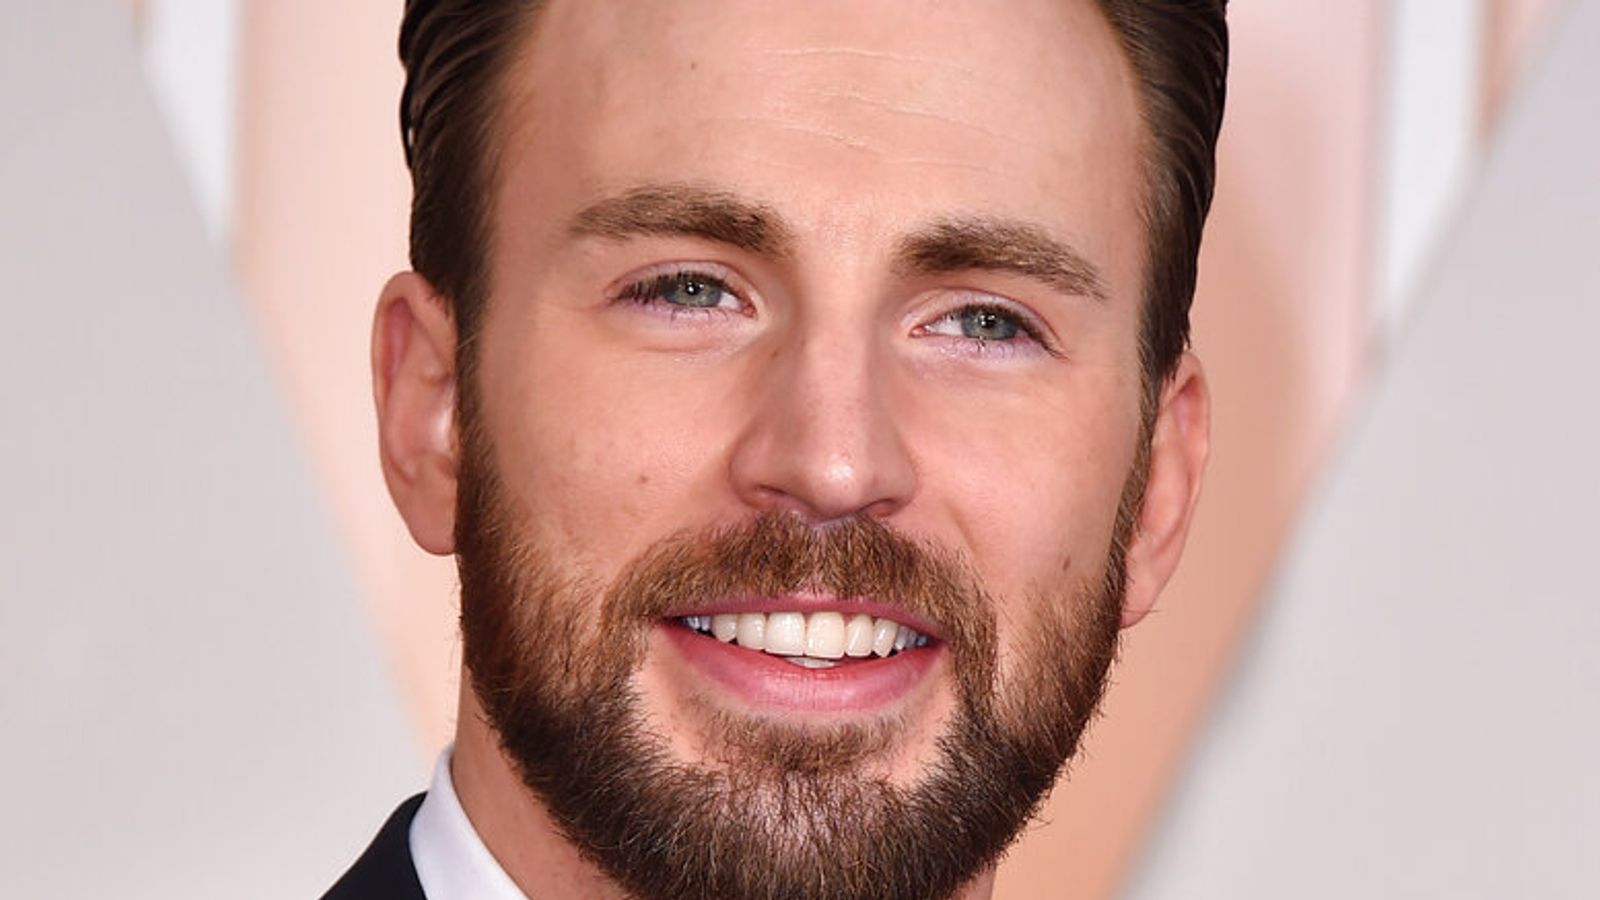 Captain America star Chris Evans marries actress Alba Baptista in at-home ceremony | Ents & Arts News